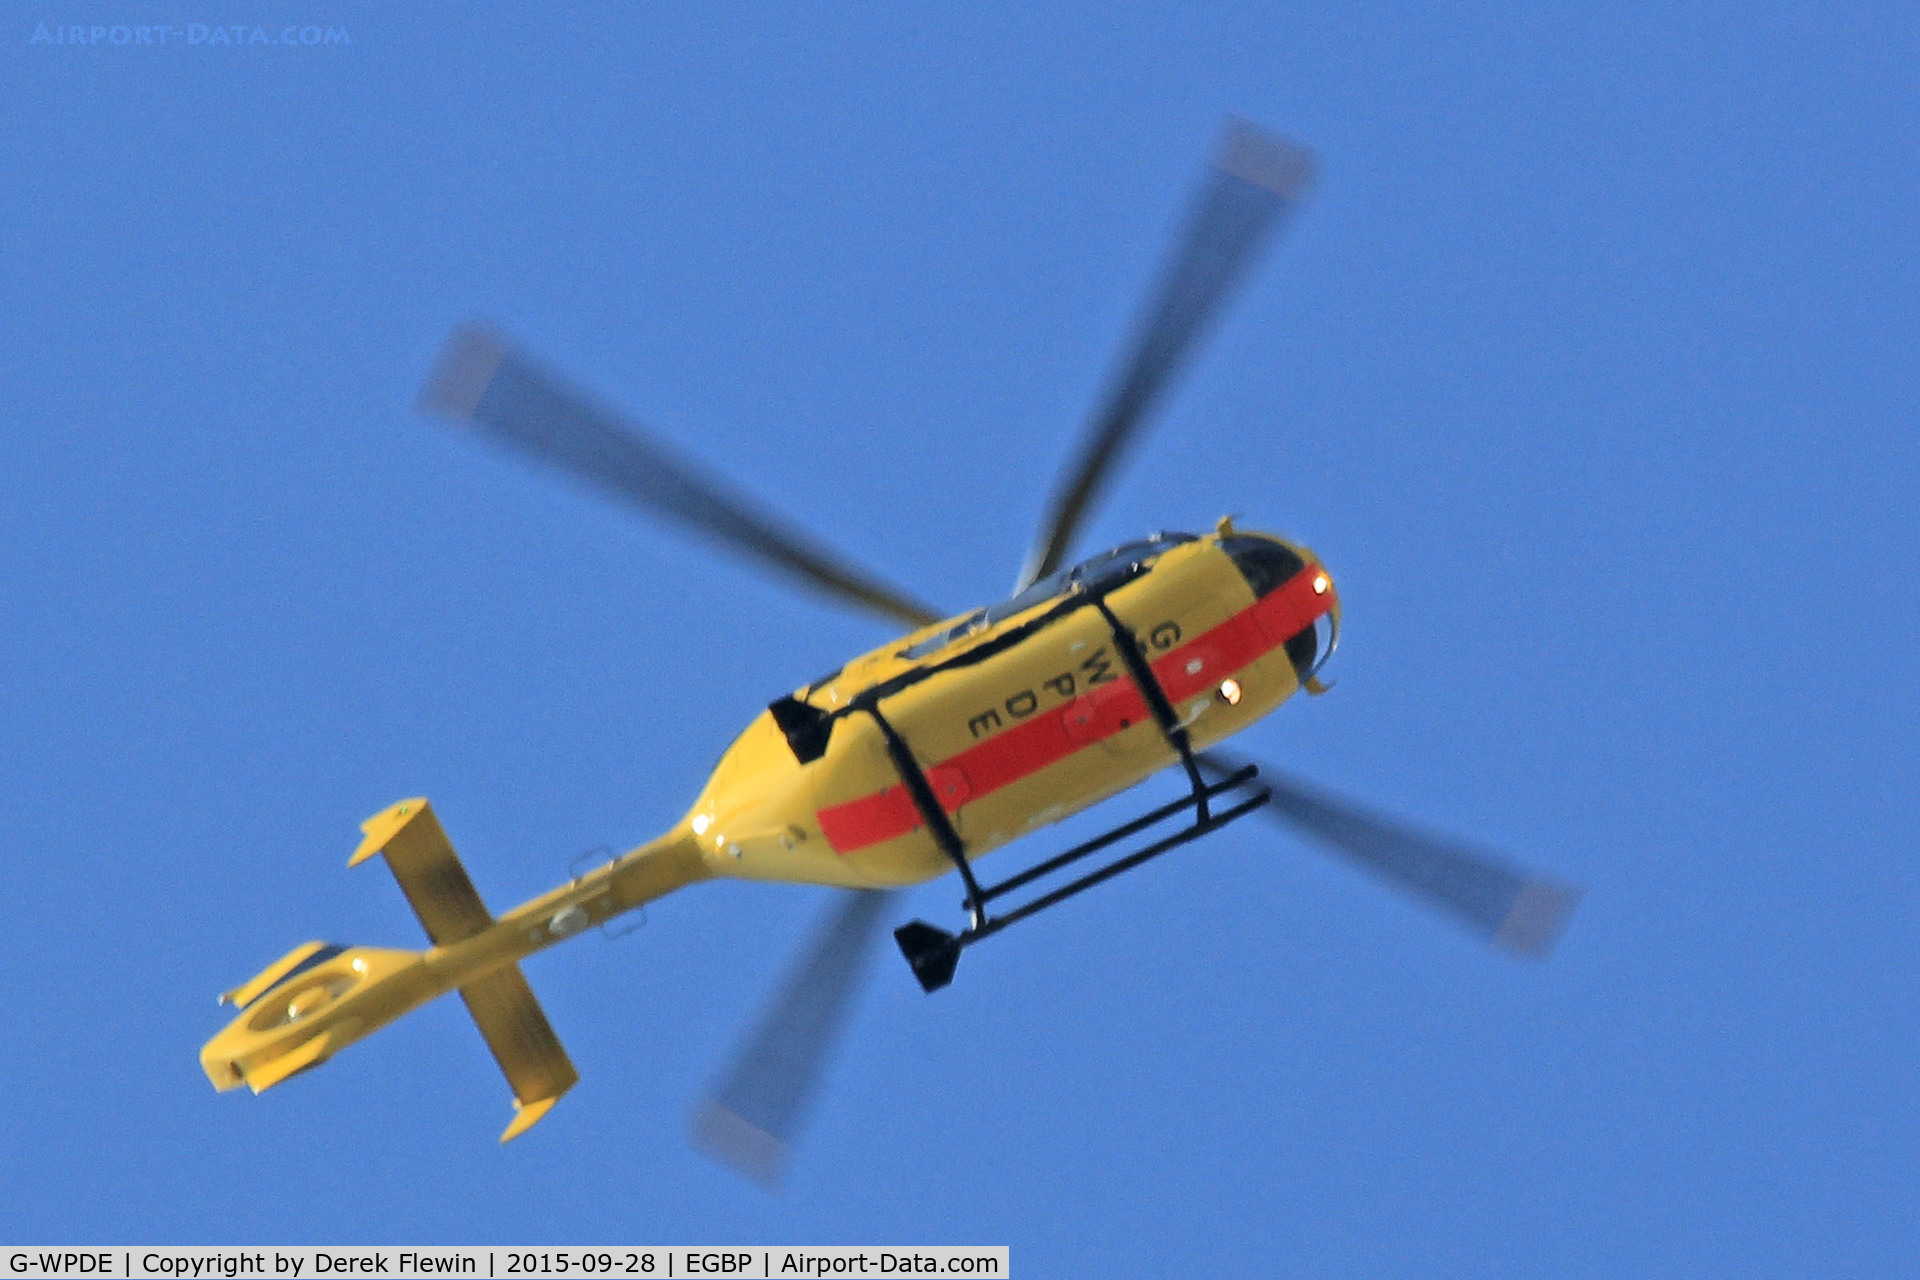 G-WPDE, 2015 Airbus Helicopters EC-135P-2+ C/N 1145, EC-135P-2+, Bristol Lulsgate based, previously D-HECP, seen in the overhead.